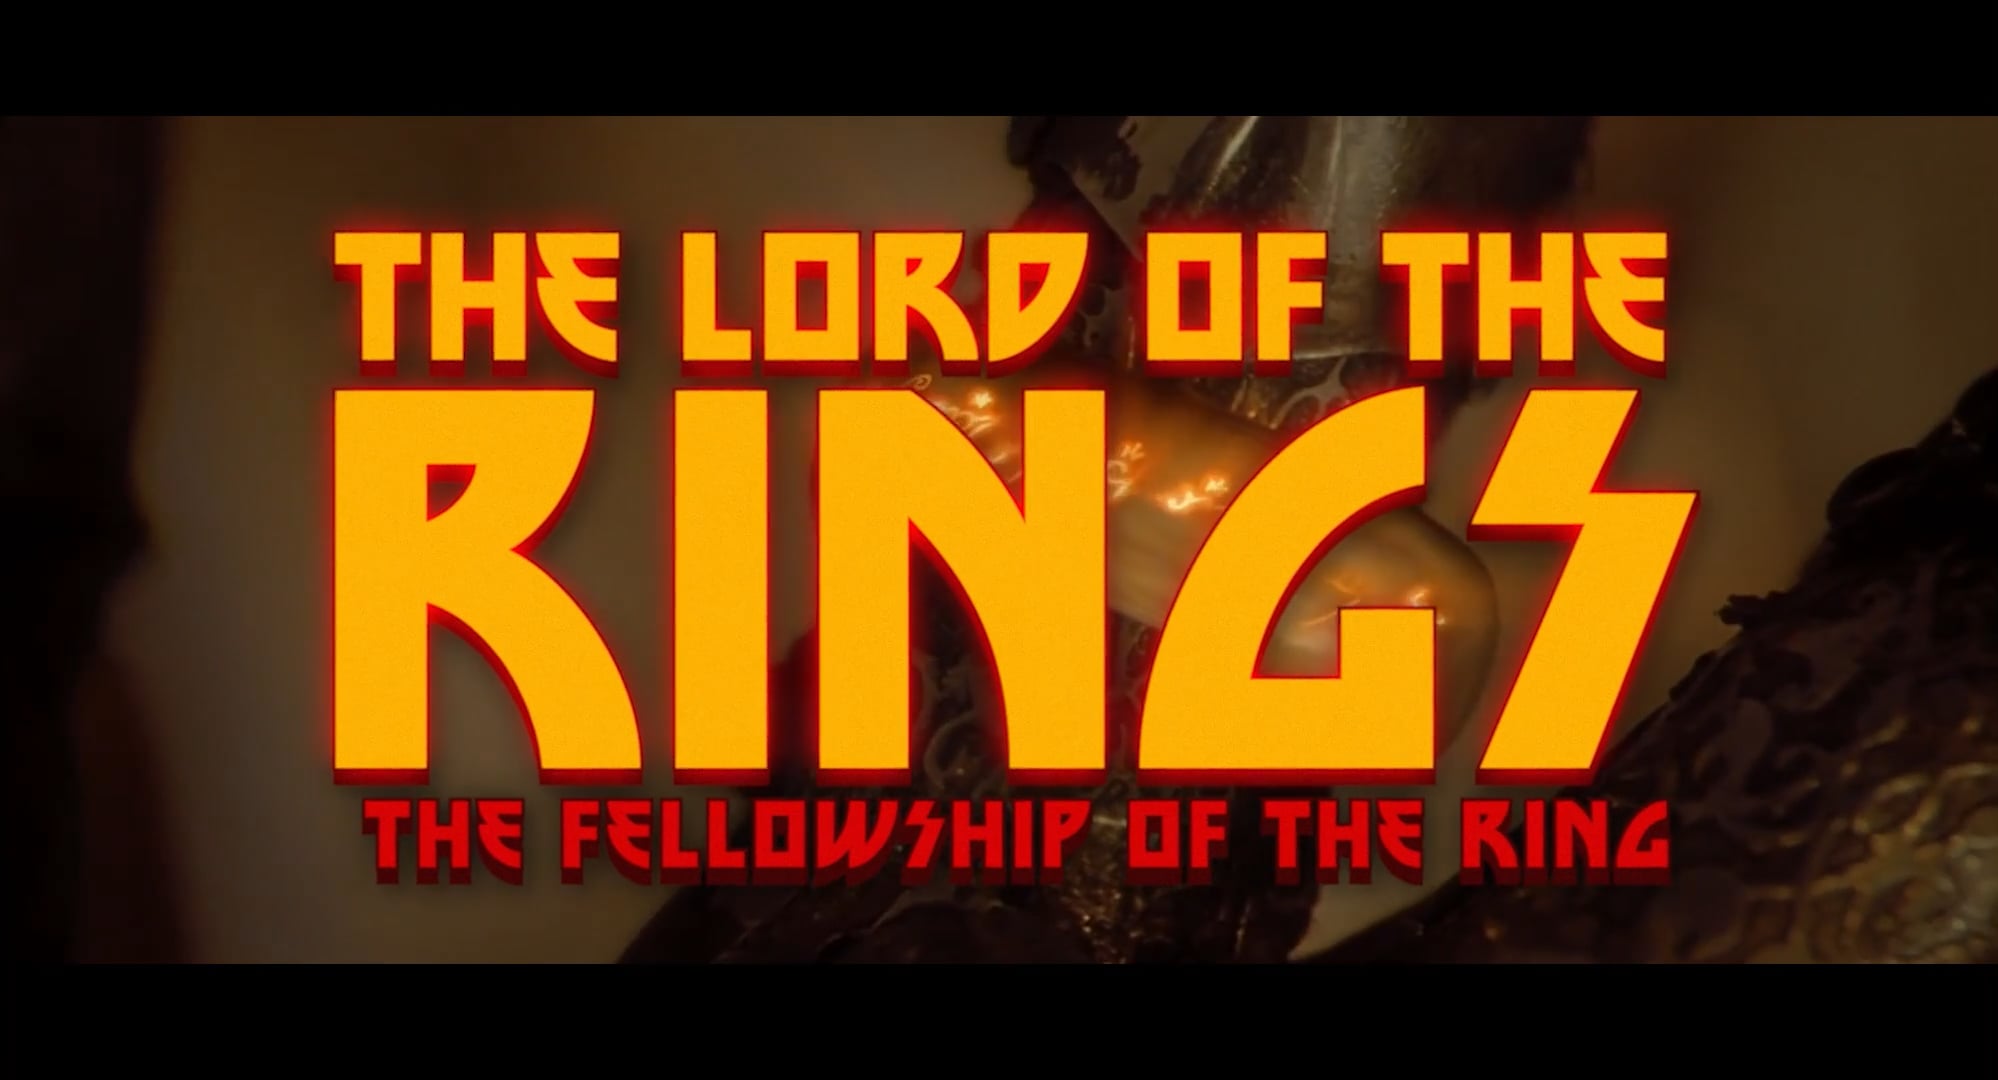 THE PERFECT DATE PRESENTS - THE LORD OF THE RINGS: THE FELLOWSHIP OF THE  RING - TRAILER on Vimeo